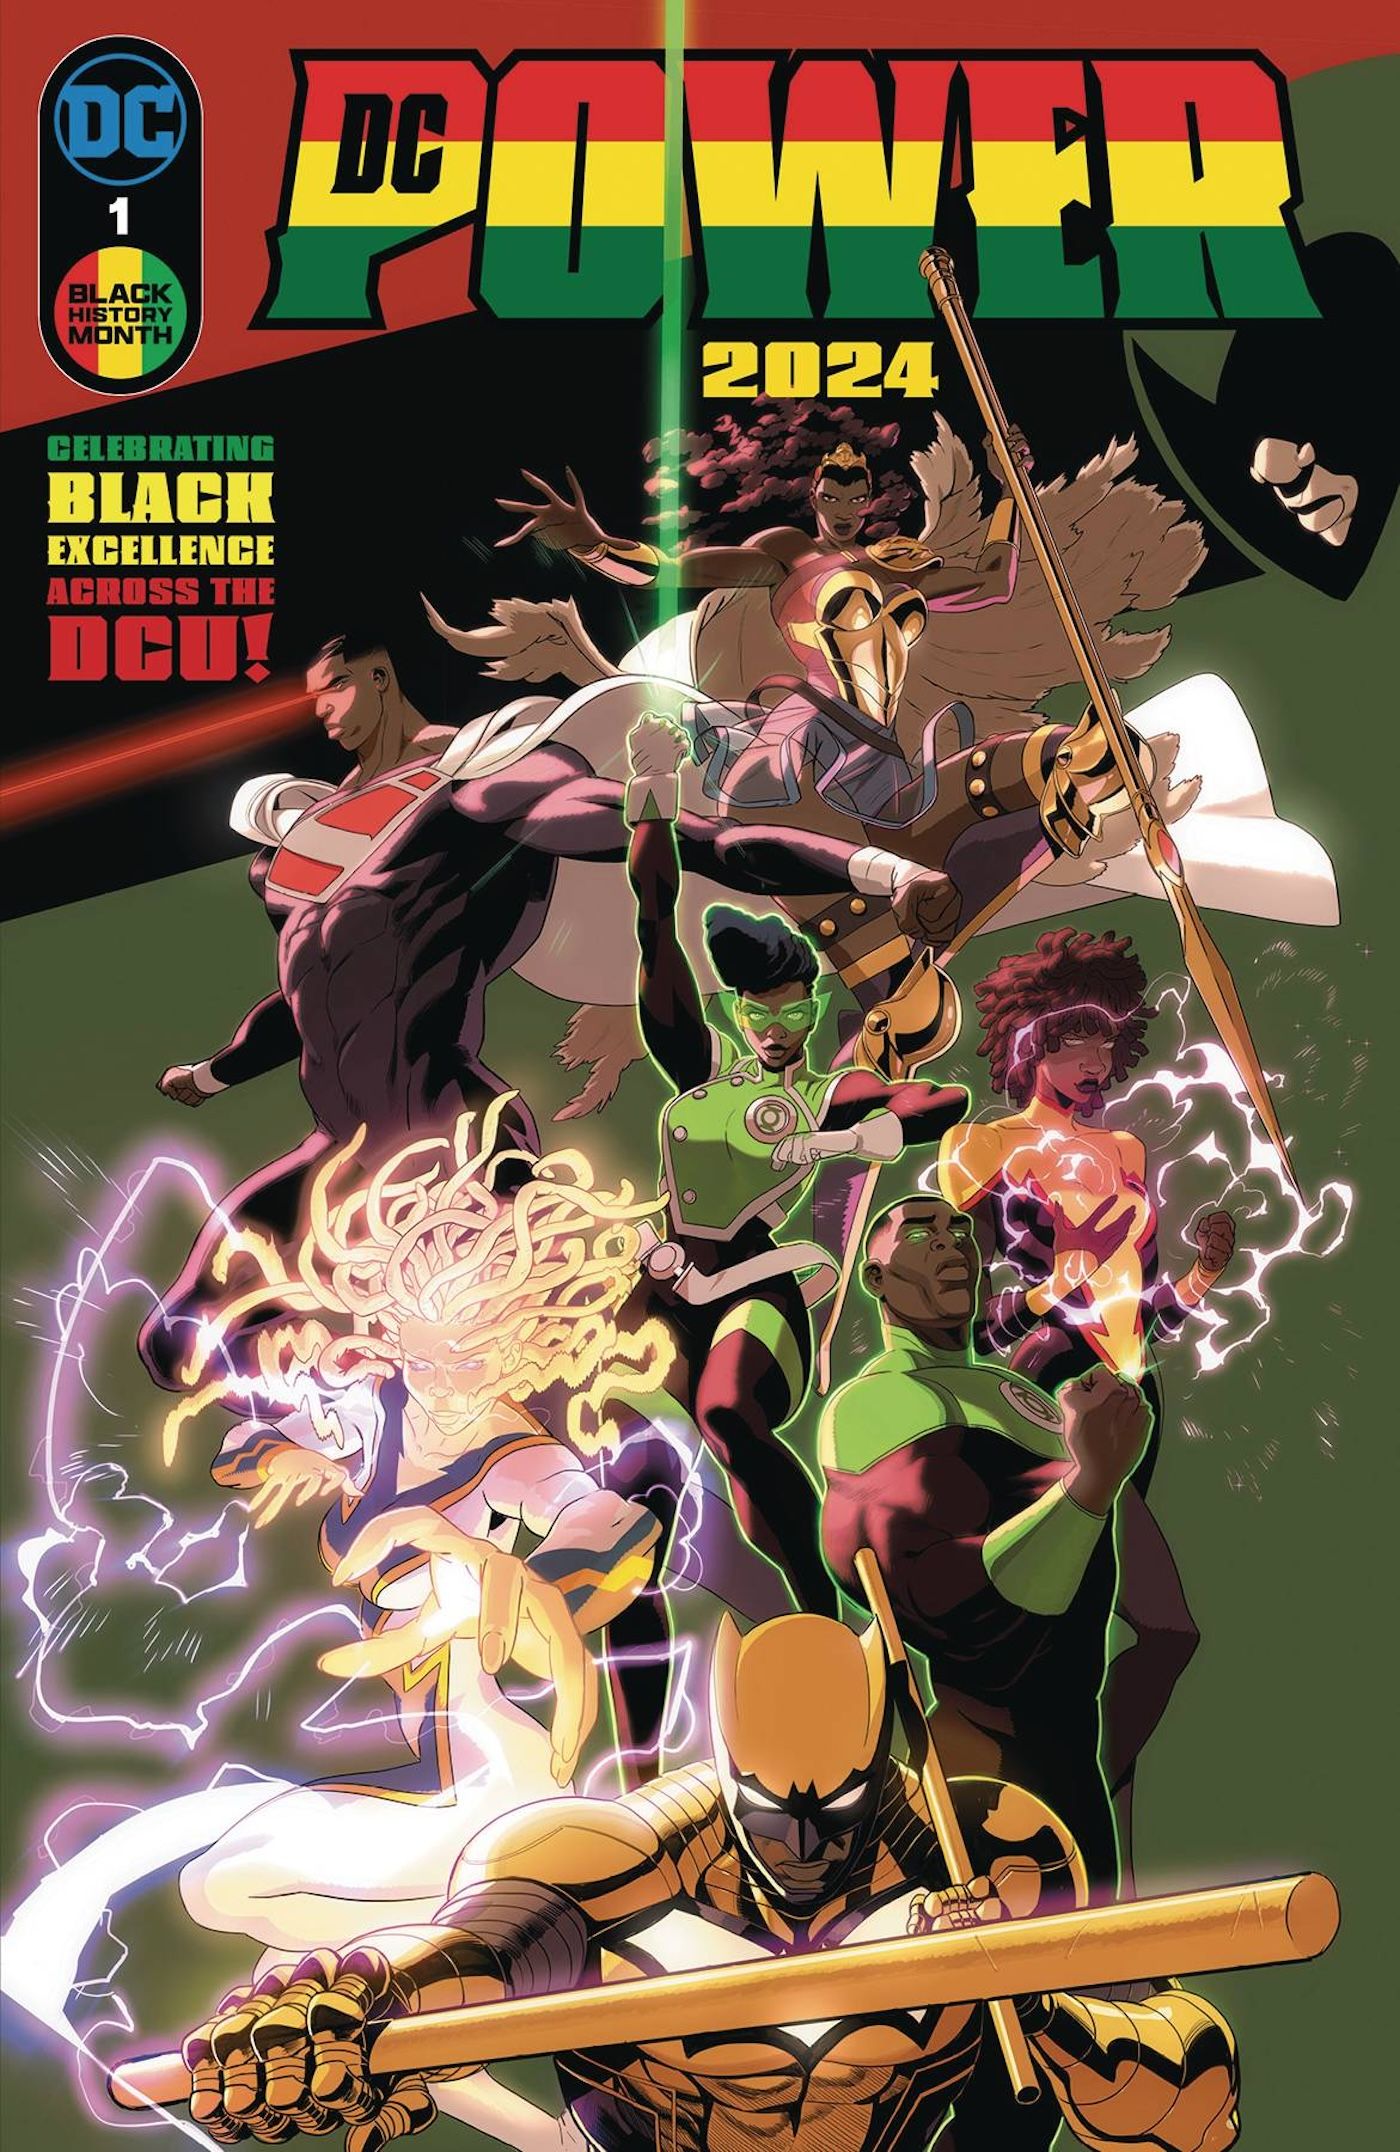 DC Power 2024 1 Main Cover: DC's Black superheroes pose together.